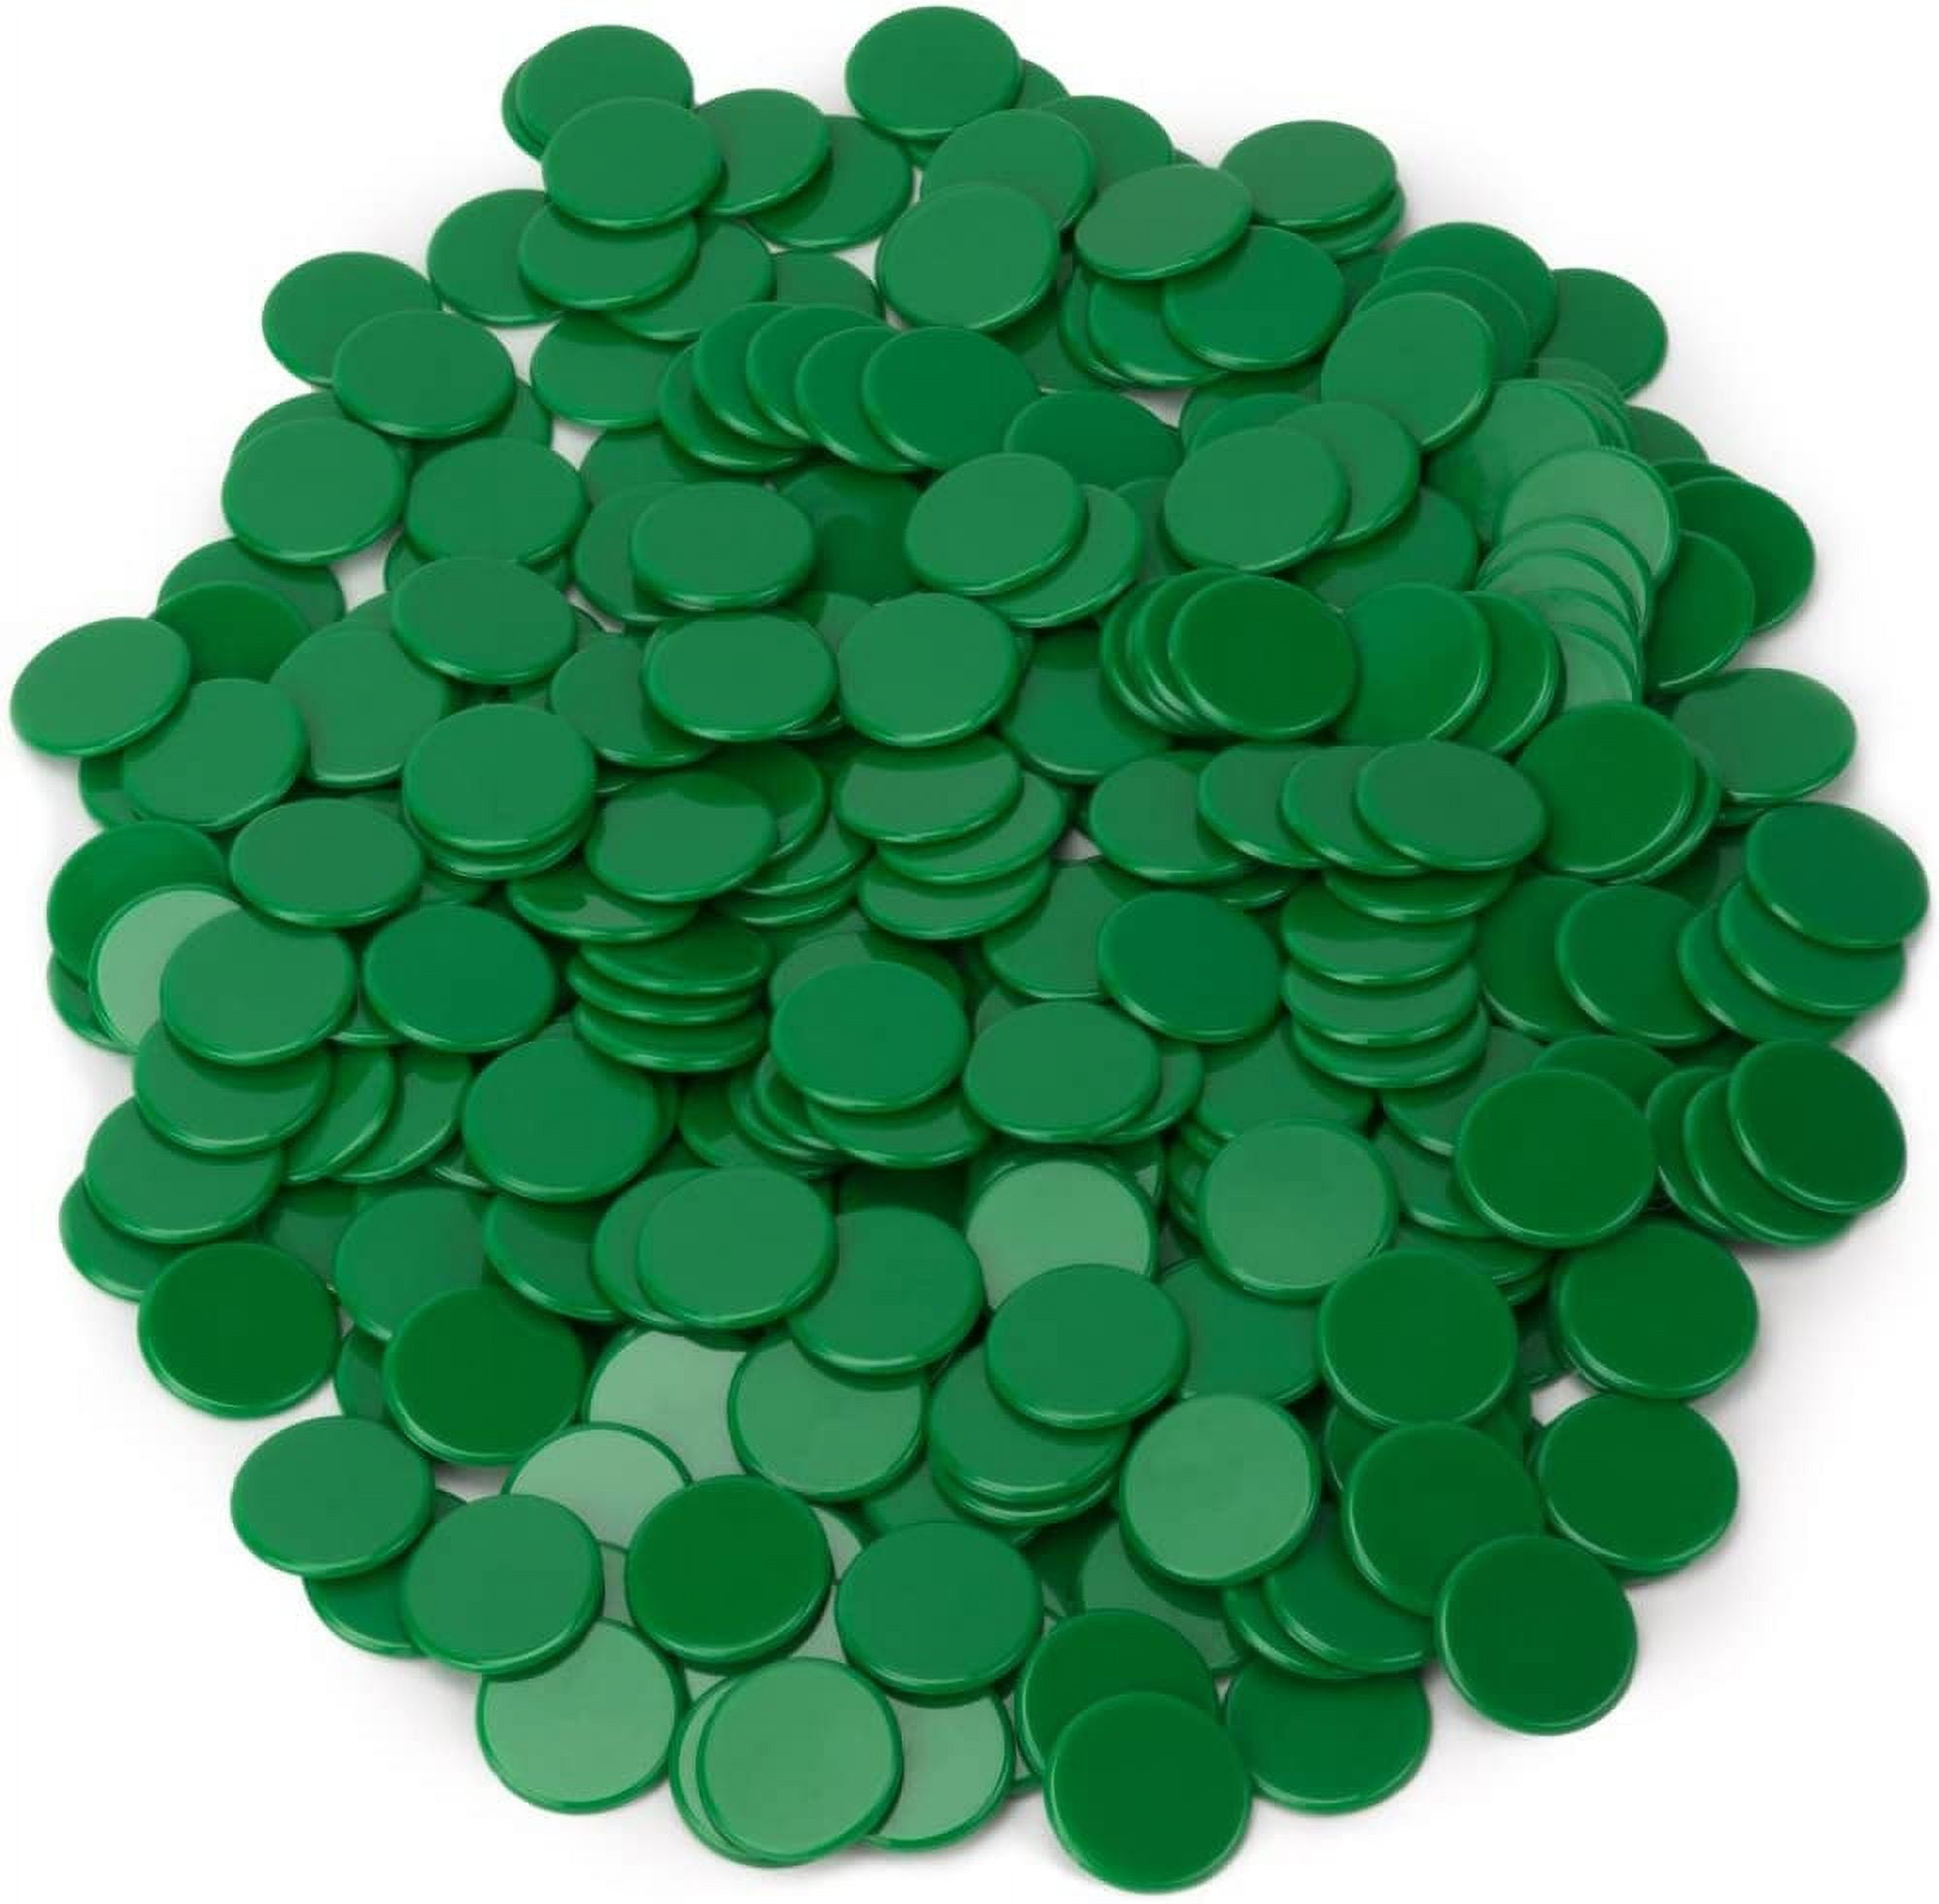 Solid Green Bingo Chips, Pack Of 300